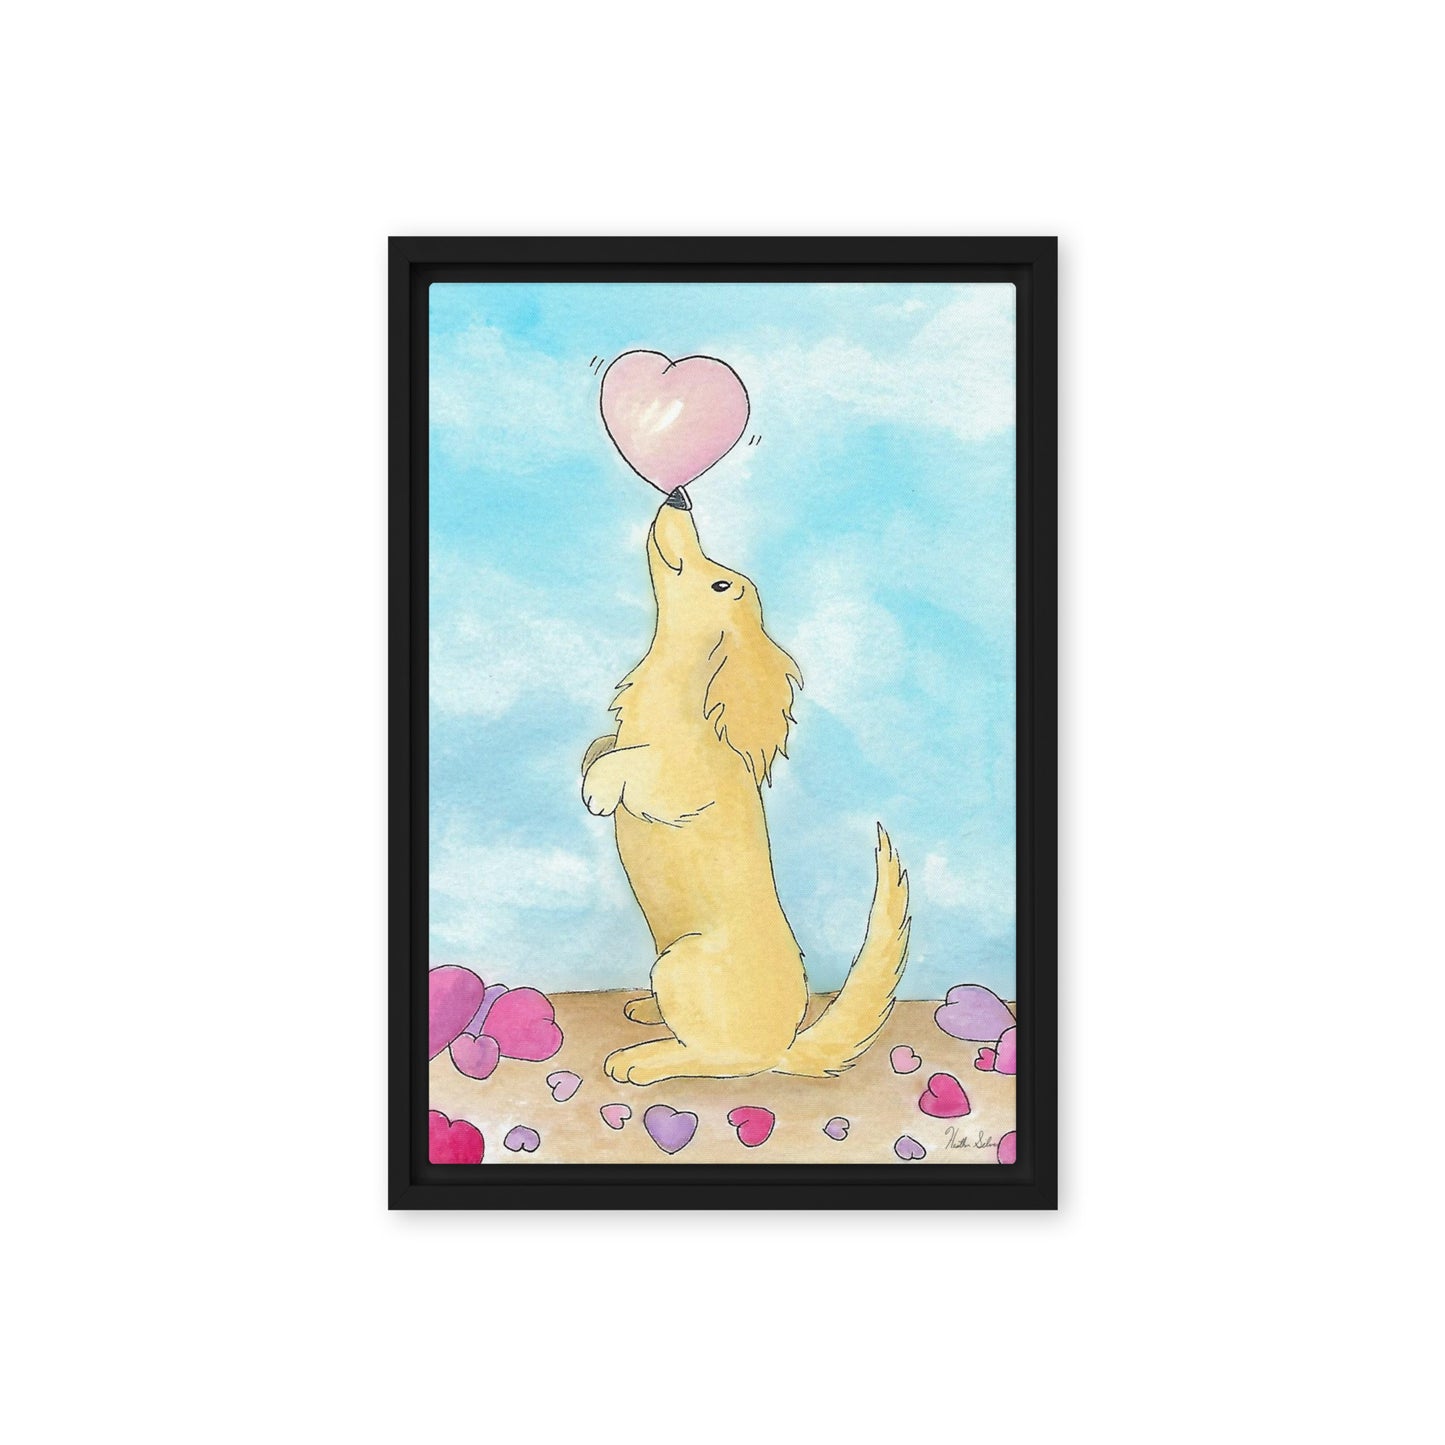 12 by 18 inch framed canvas Puppy Love print. The canvas is in a black pine wood frame.